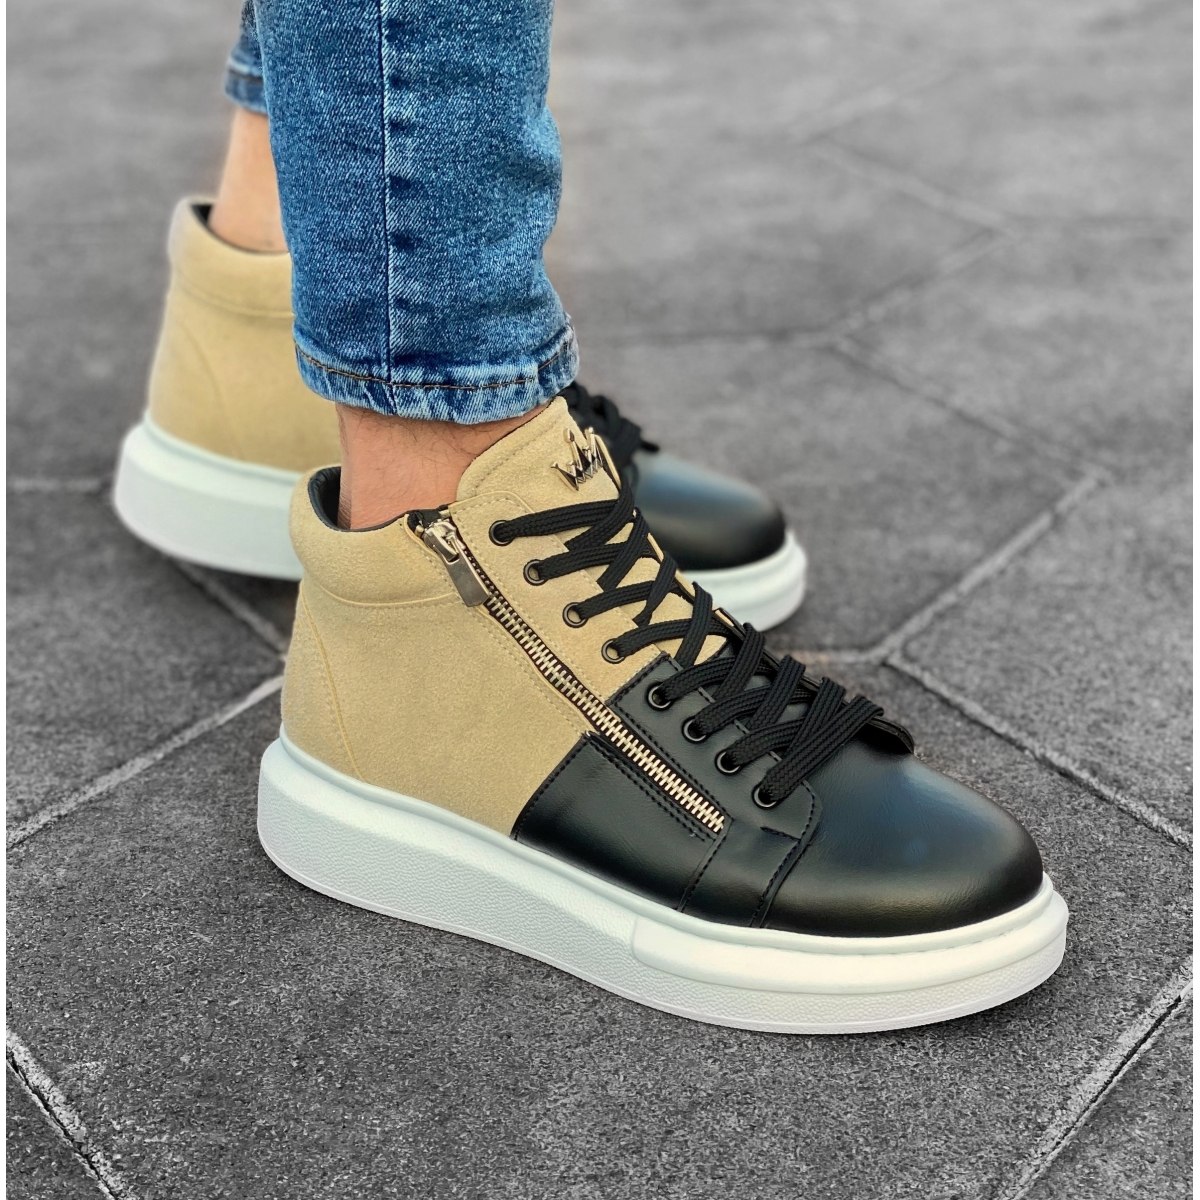 Hype Sole Zipped Style High Top Sneakers in Cream-Black | Martin Valen